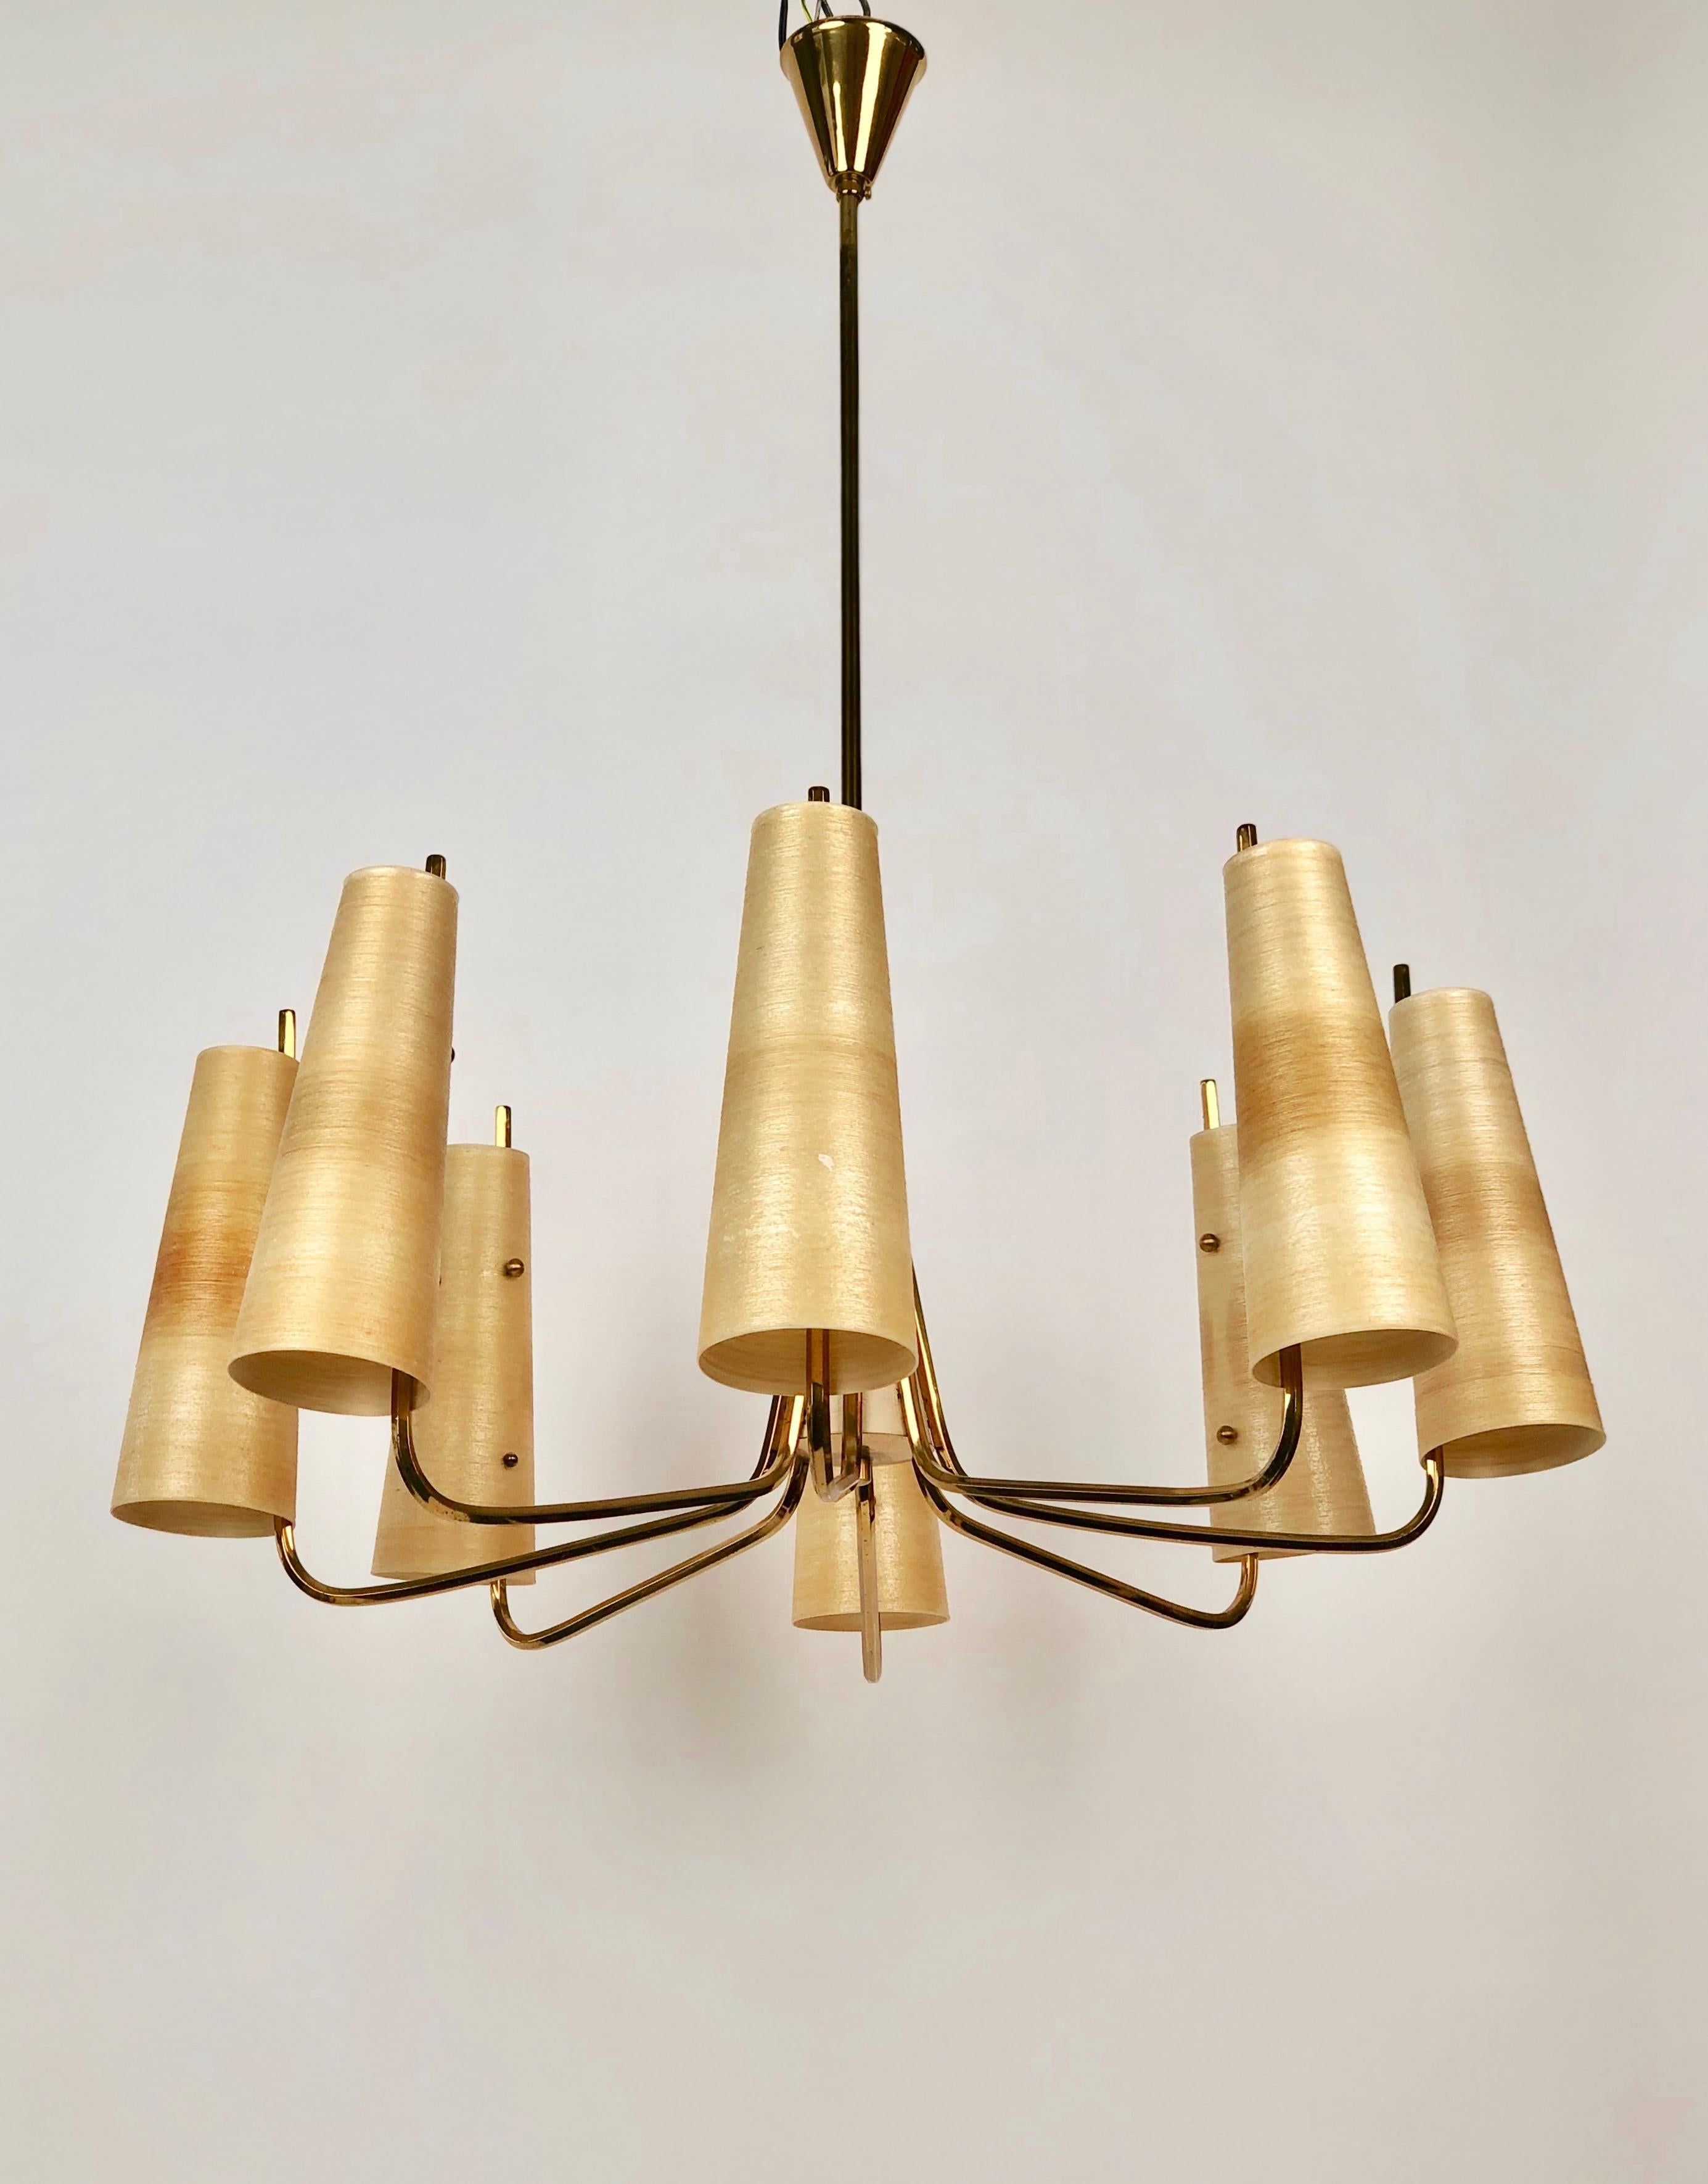 Mid-century chandelier with eight arms in brass. The arms are made from hexagonal
tubbing giving the chandelier a unique character . Eight fibreglass shades compliment
the form .
